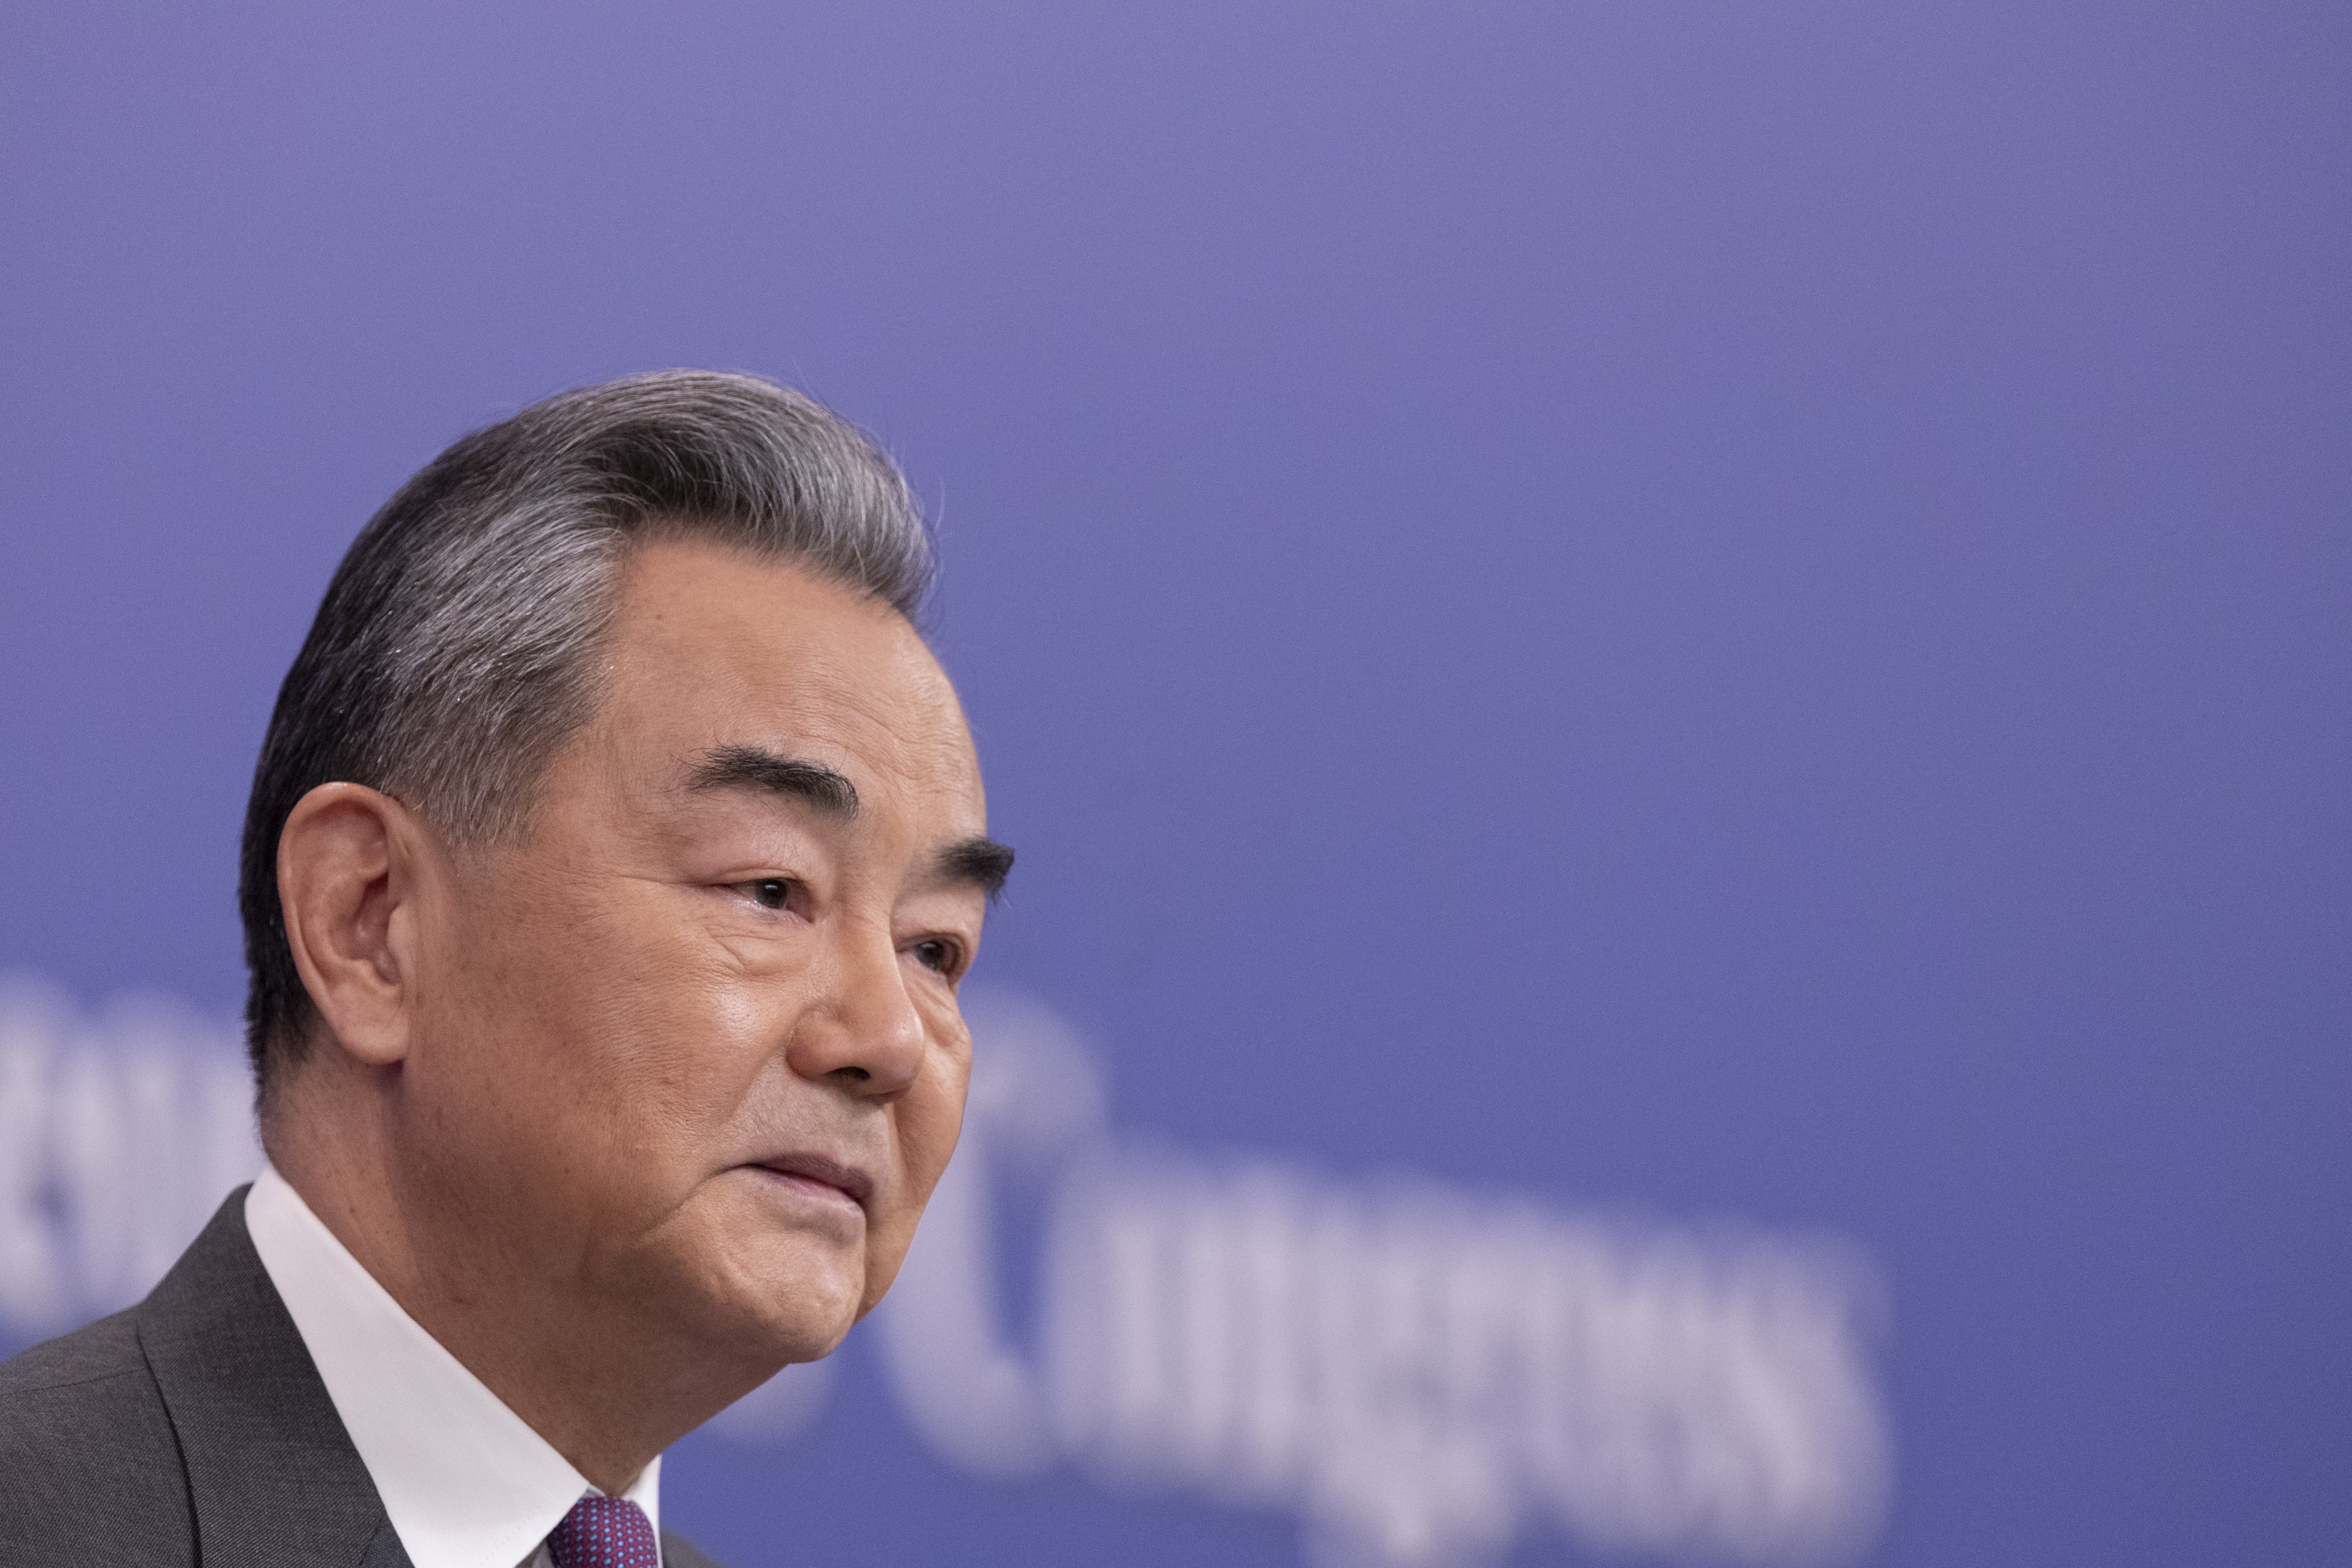 As China attempts to woo European doubters, top diplomat Wang Yi used his annual foreign policy press conference to tout the benefits of China-EU partnerships, and push back against “anti-globalisation”. Photo: EPA-EFE